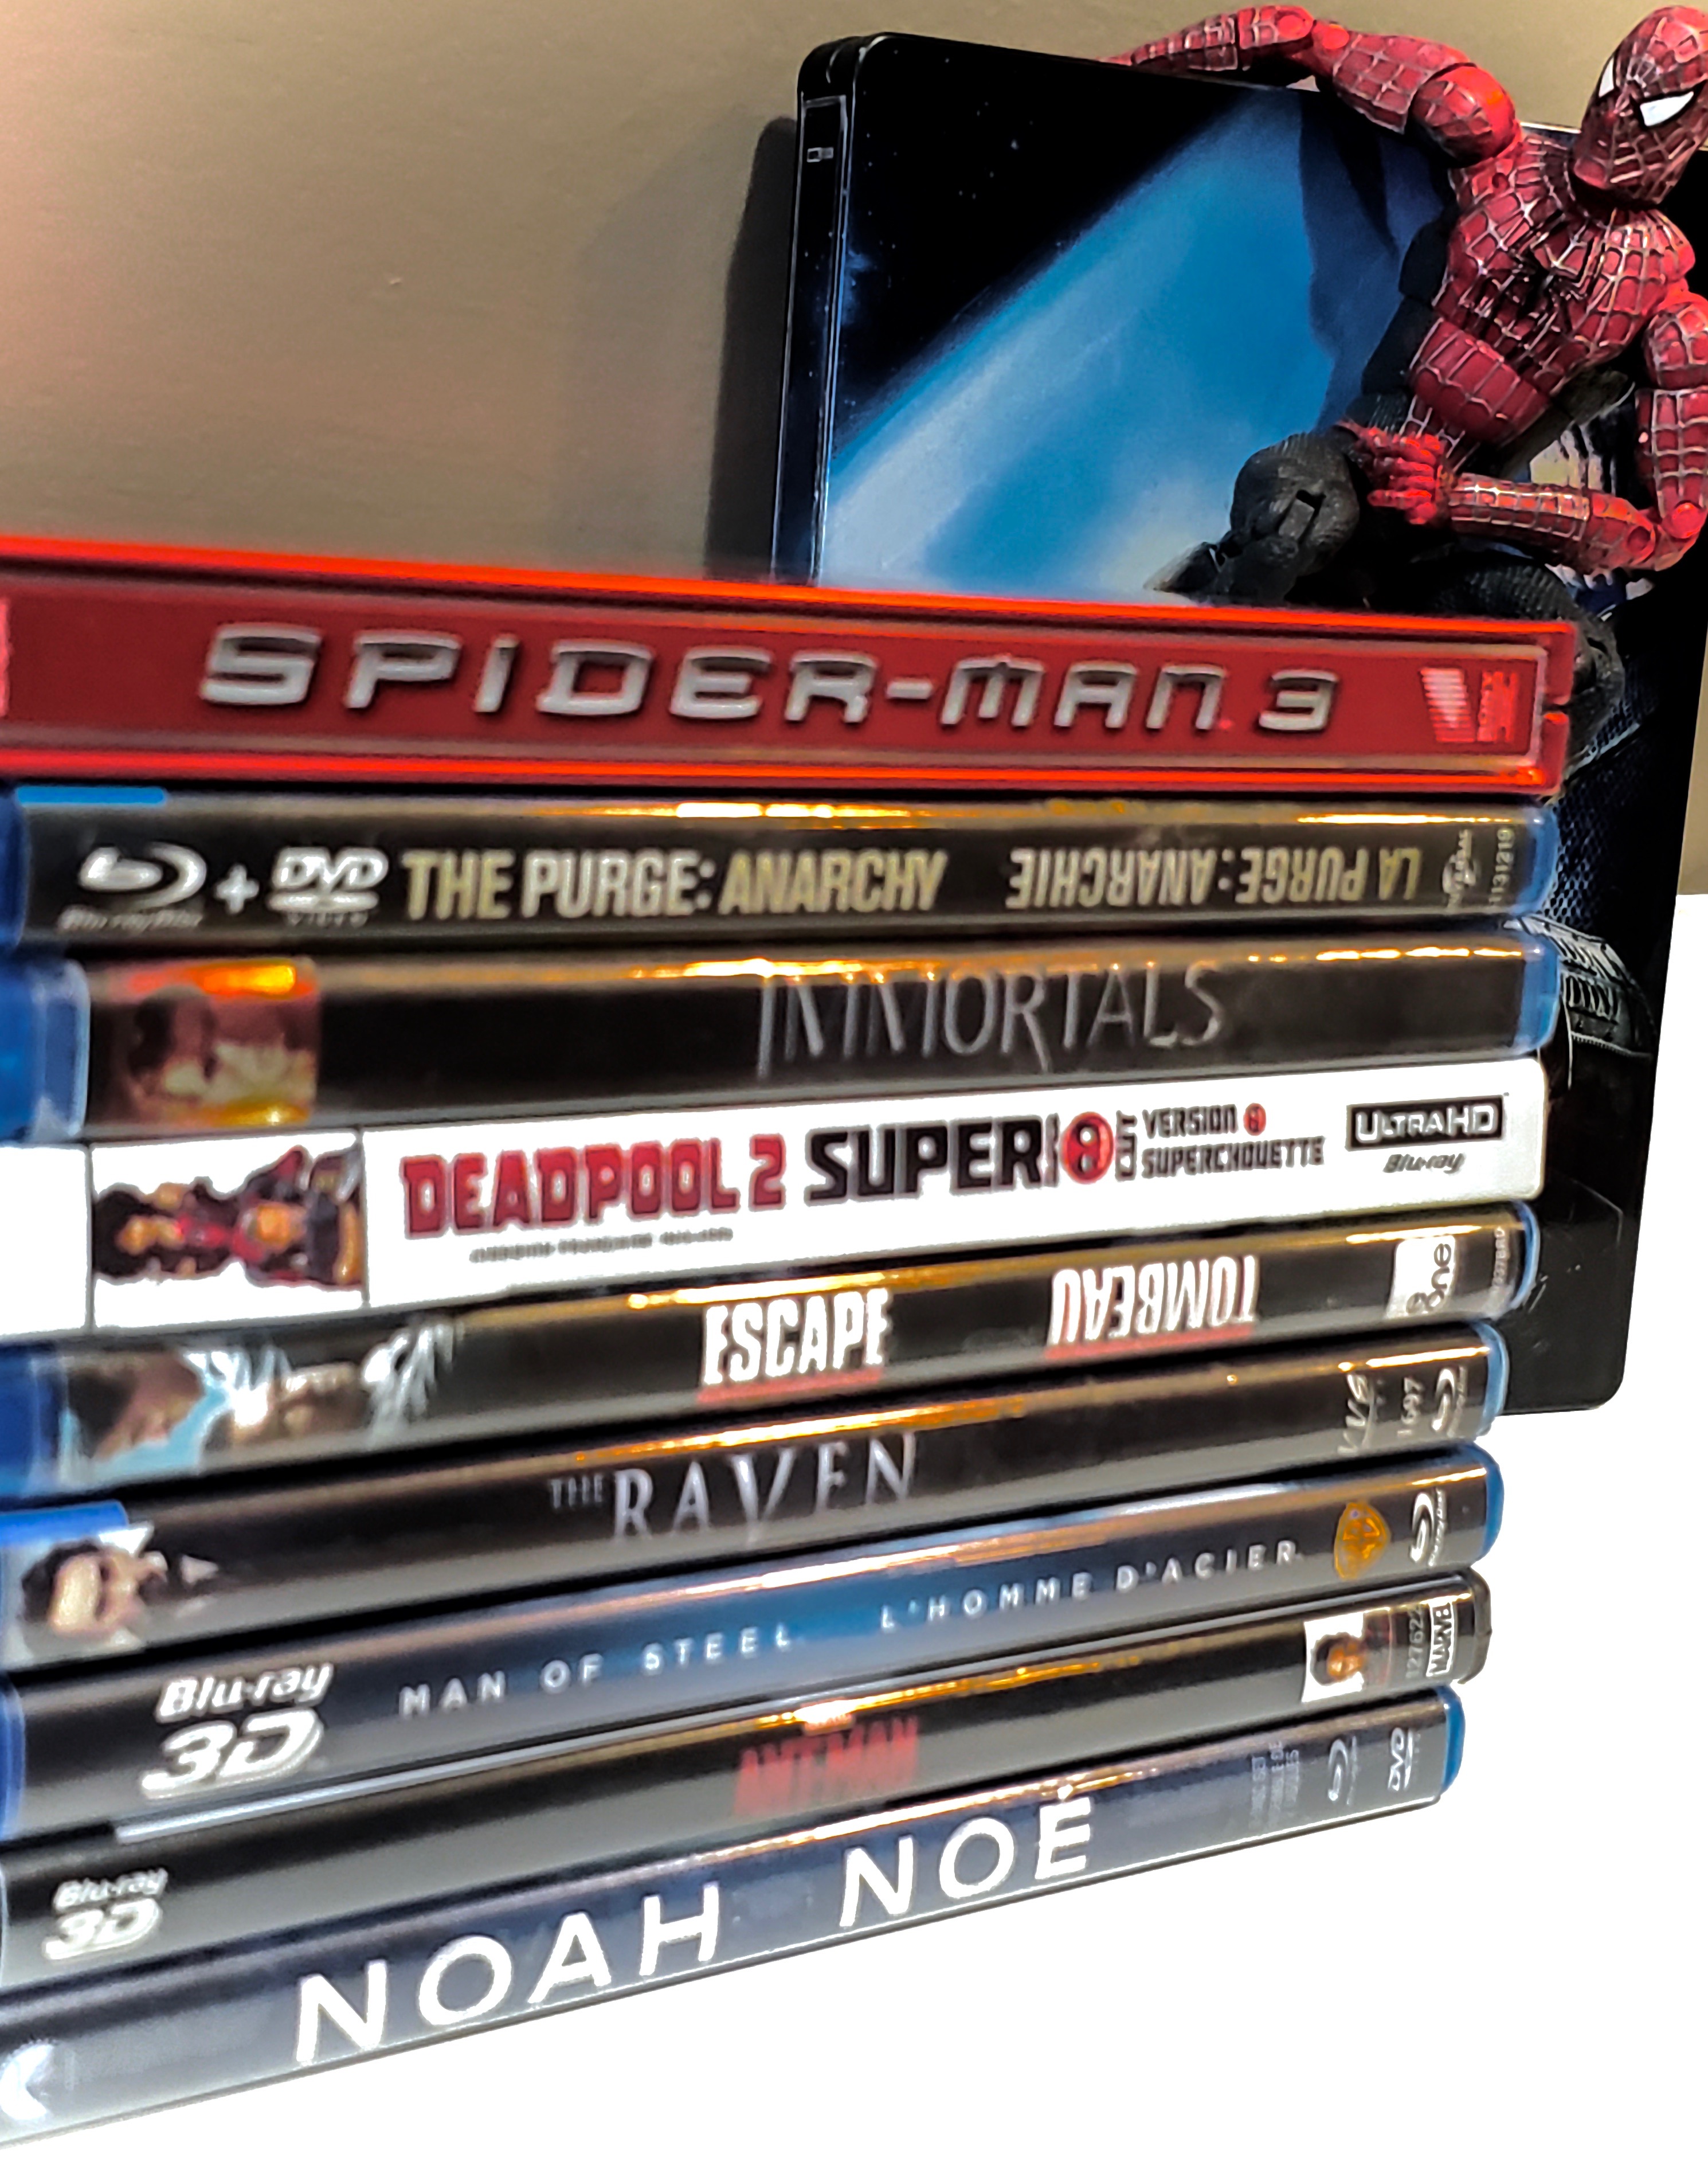 bluray collection with Spider-Man in the background